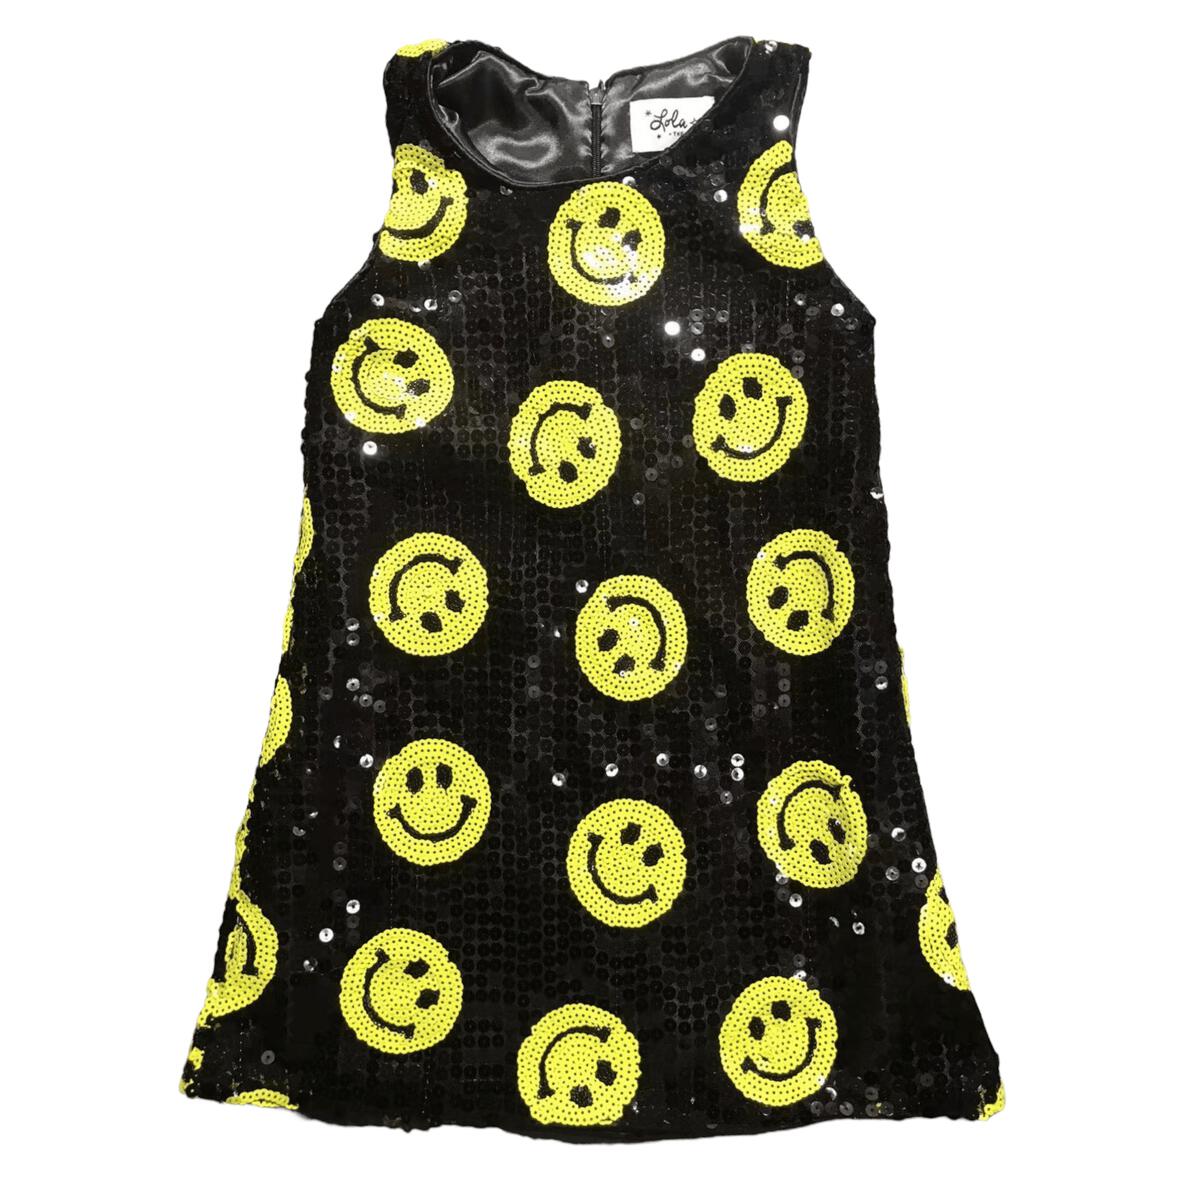 Don't Worry Be Happy Sequin Dress